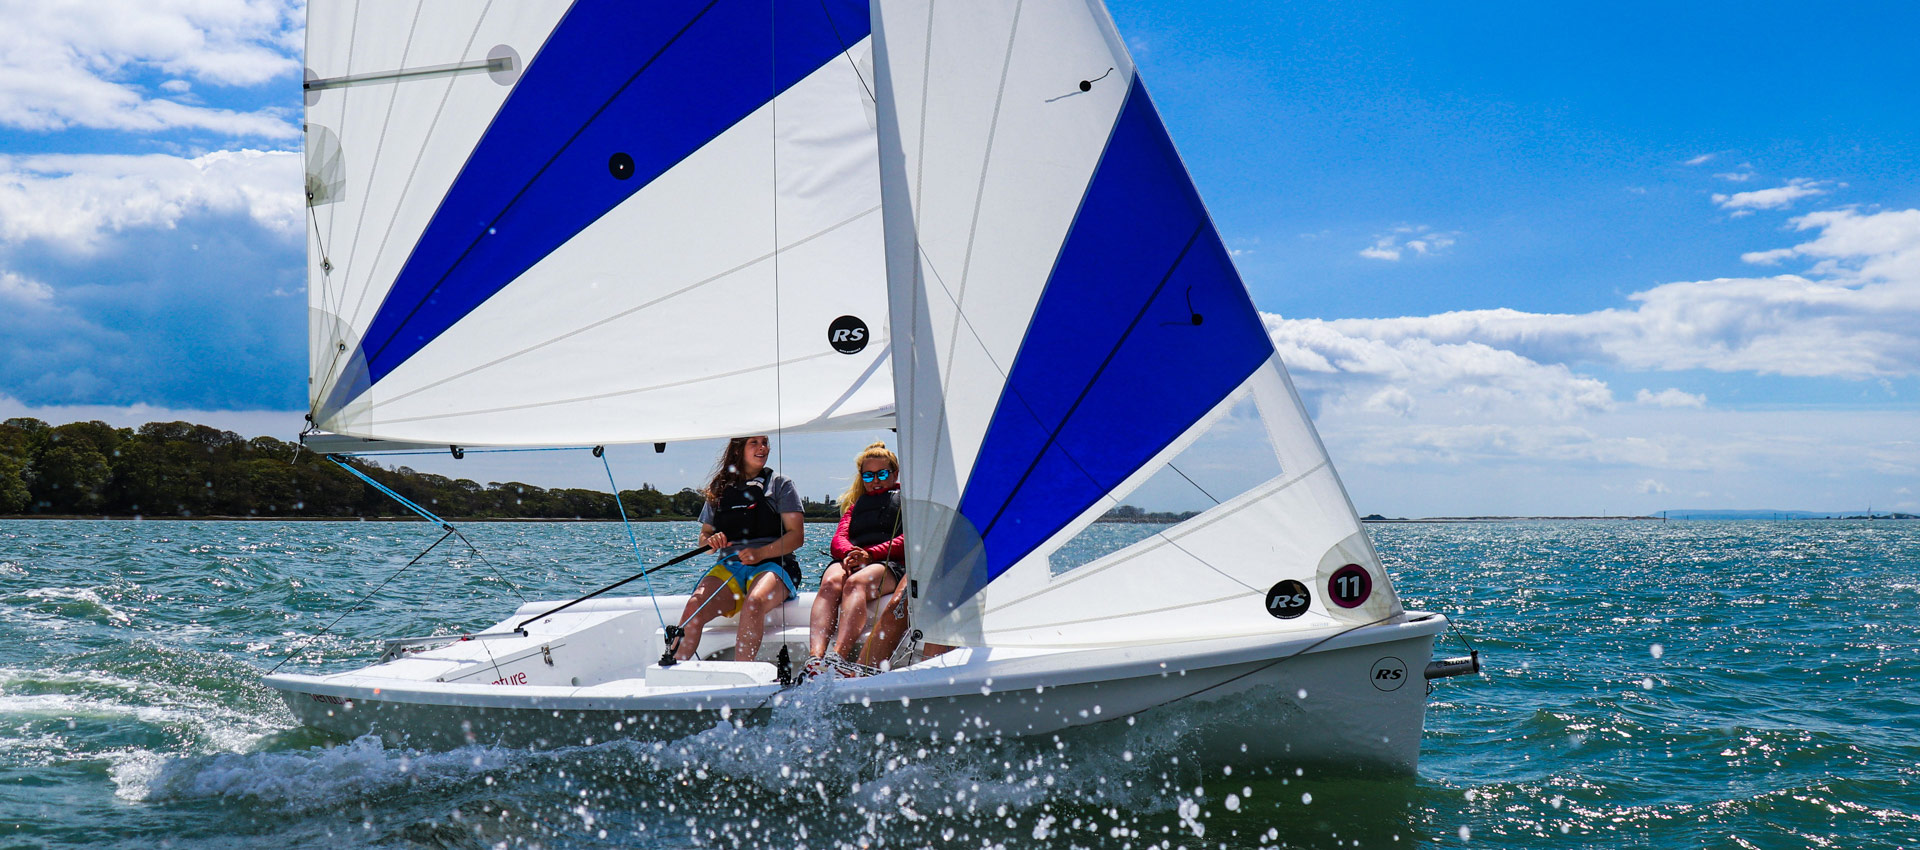 RS Venture – more space, stability and exciting features than almost any other dinghy